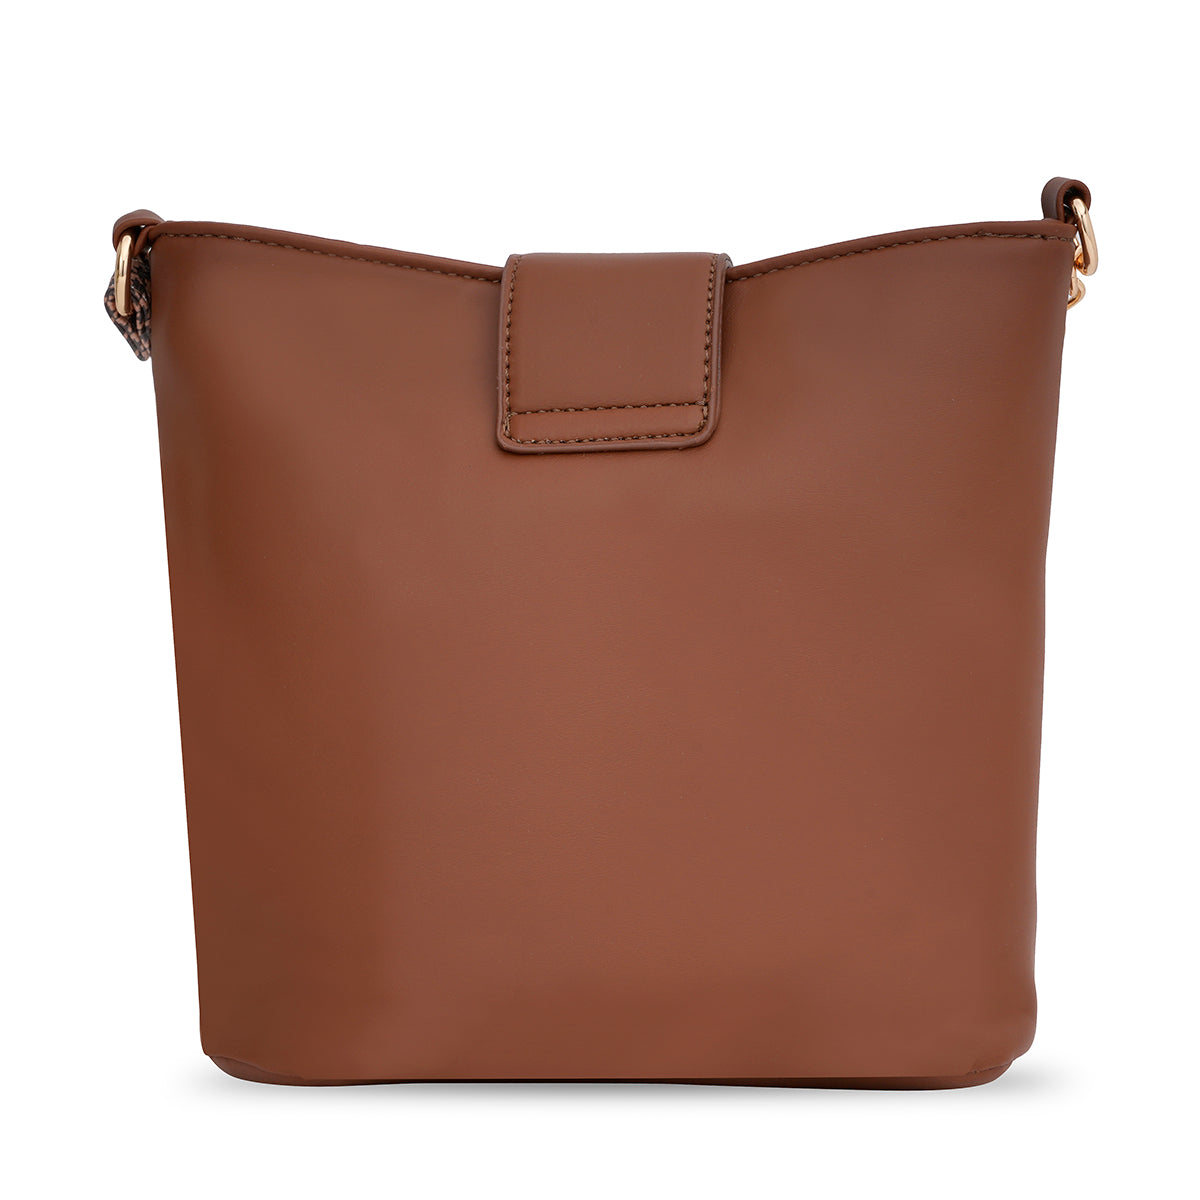 United Colors of Benetton Marie Hobo Brown